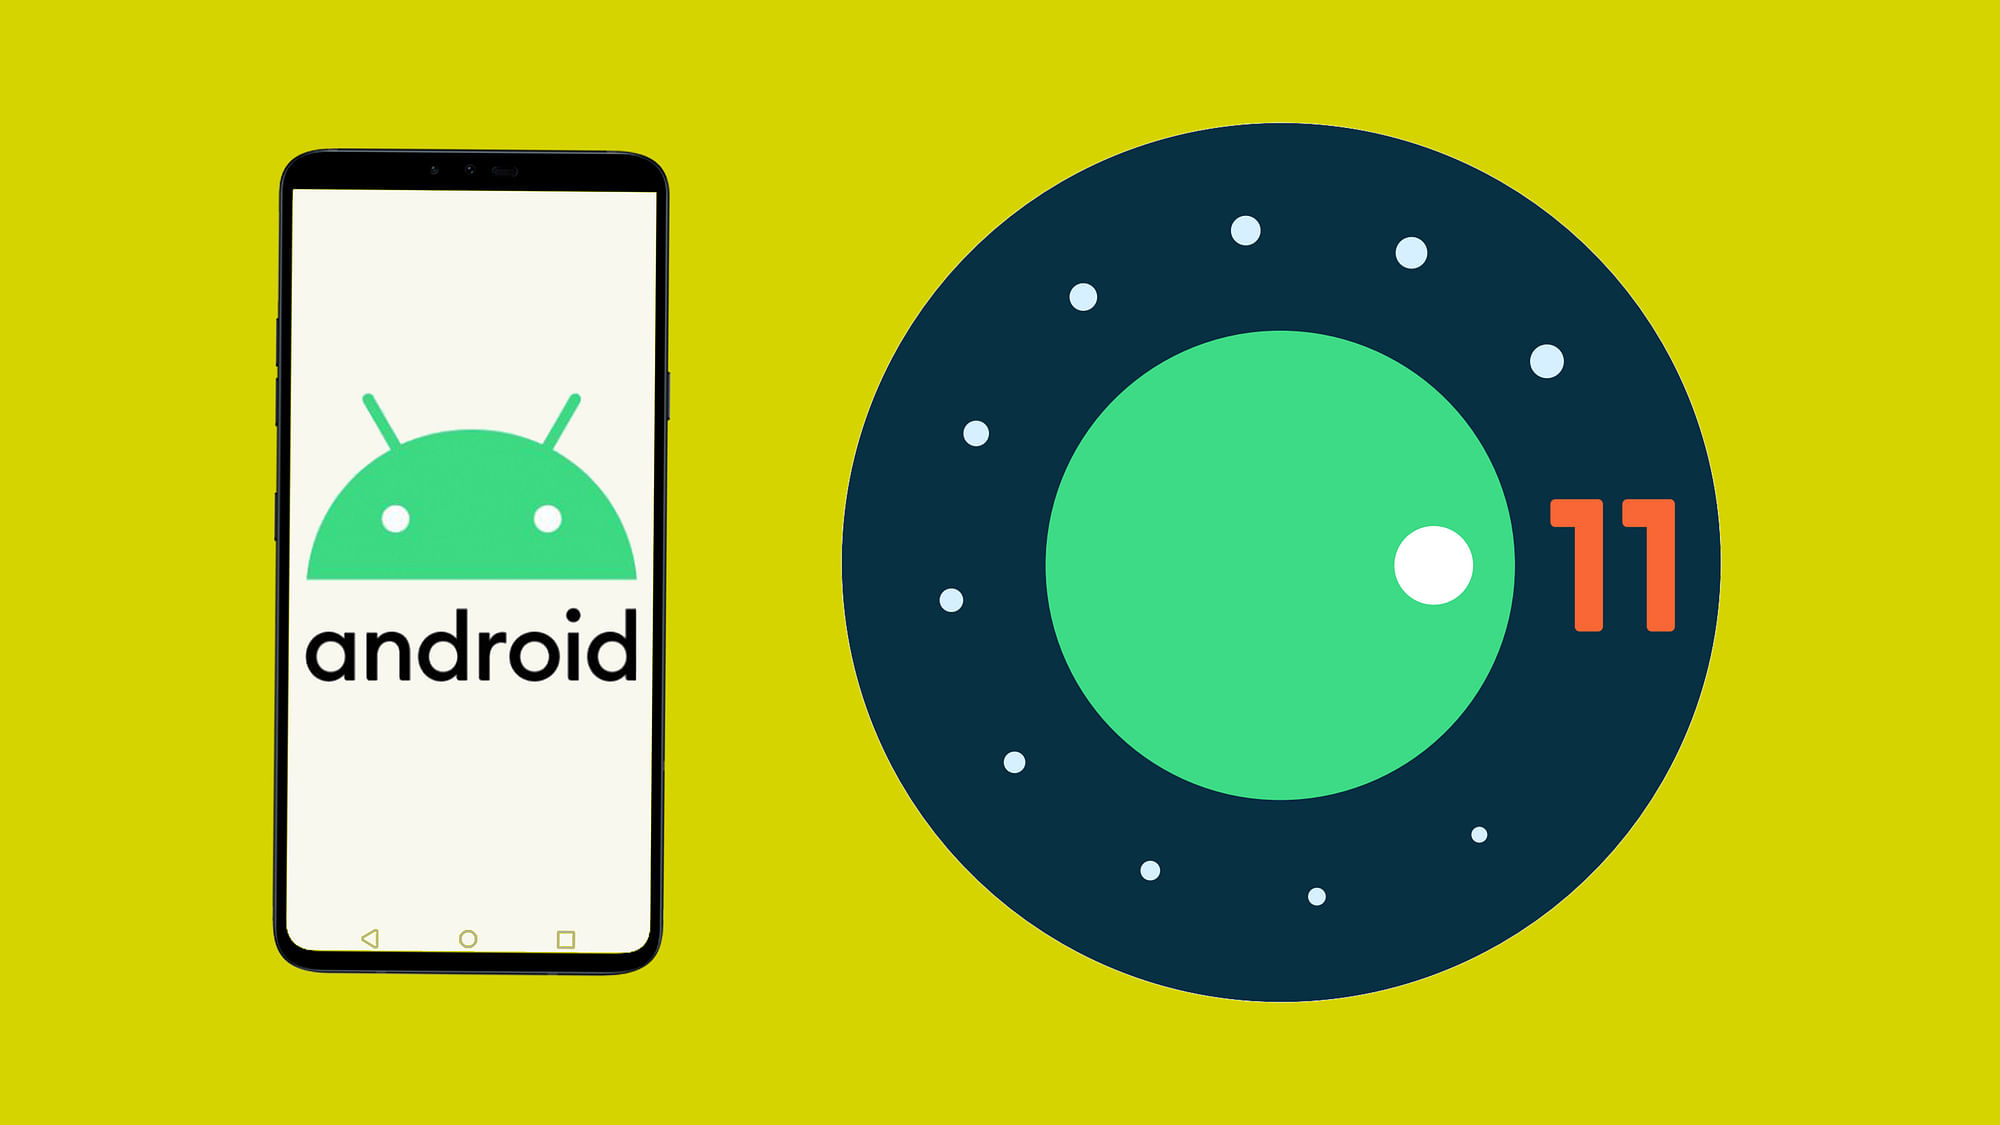 Google has released the first public beta fo the Android 11 operating system. Pixel users can receive download the update by signing up on the Android Beta website.&nbsp;